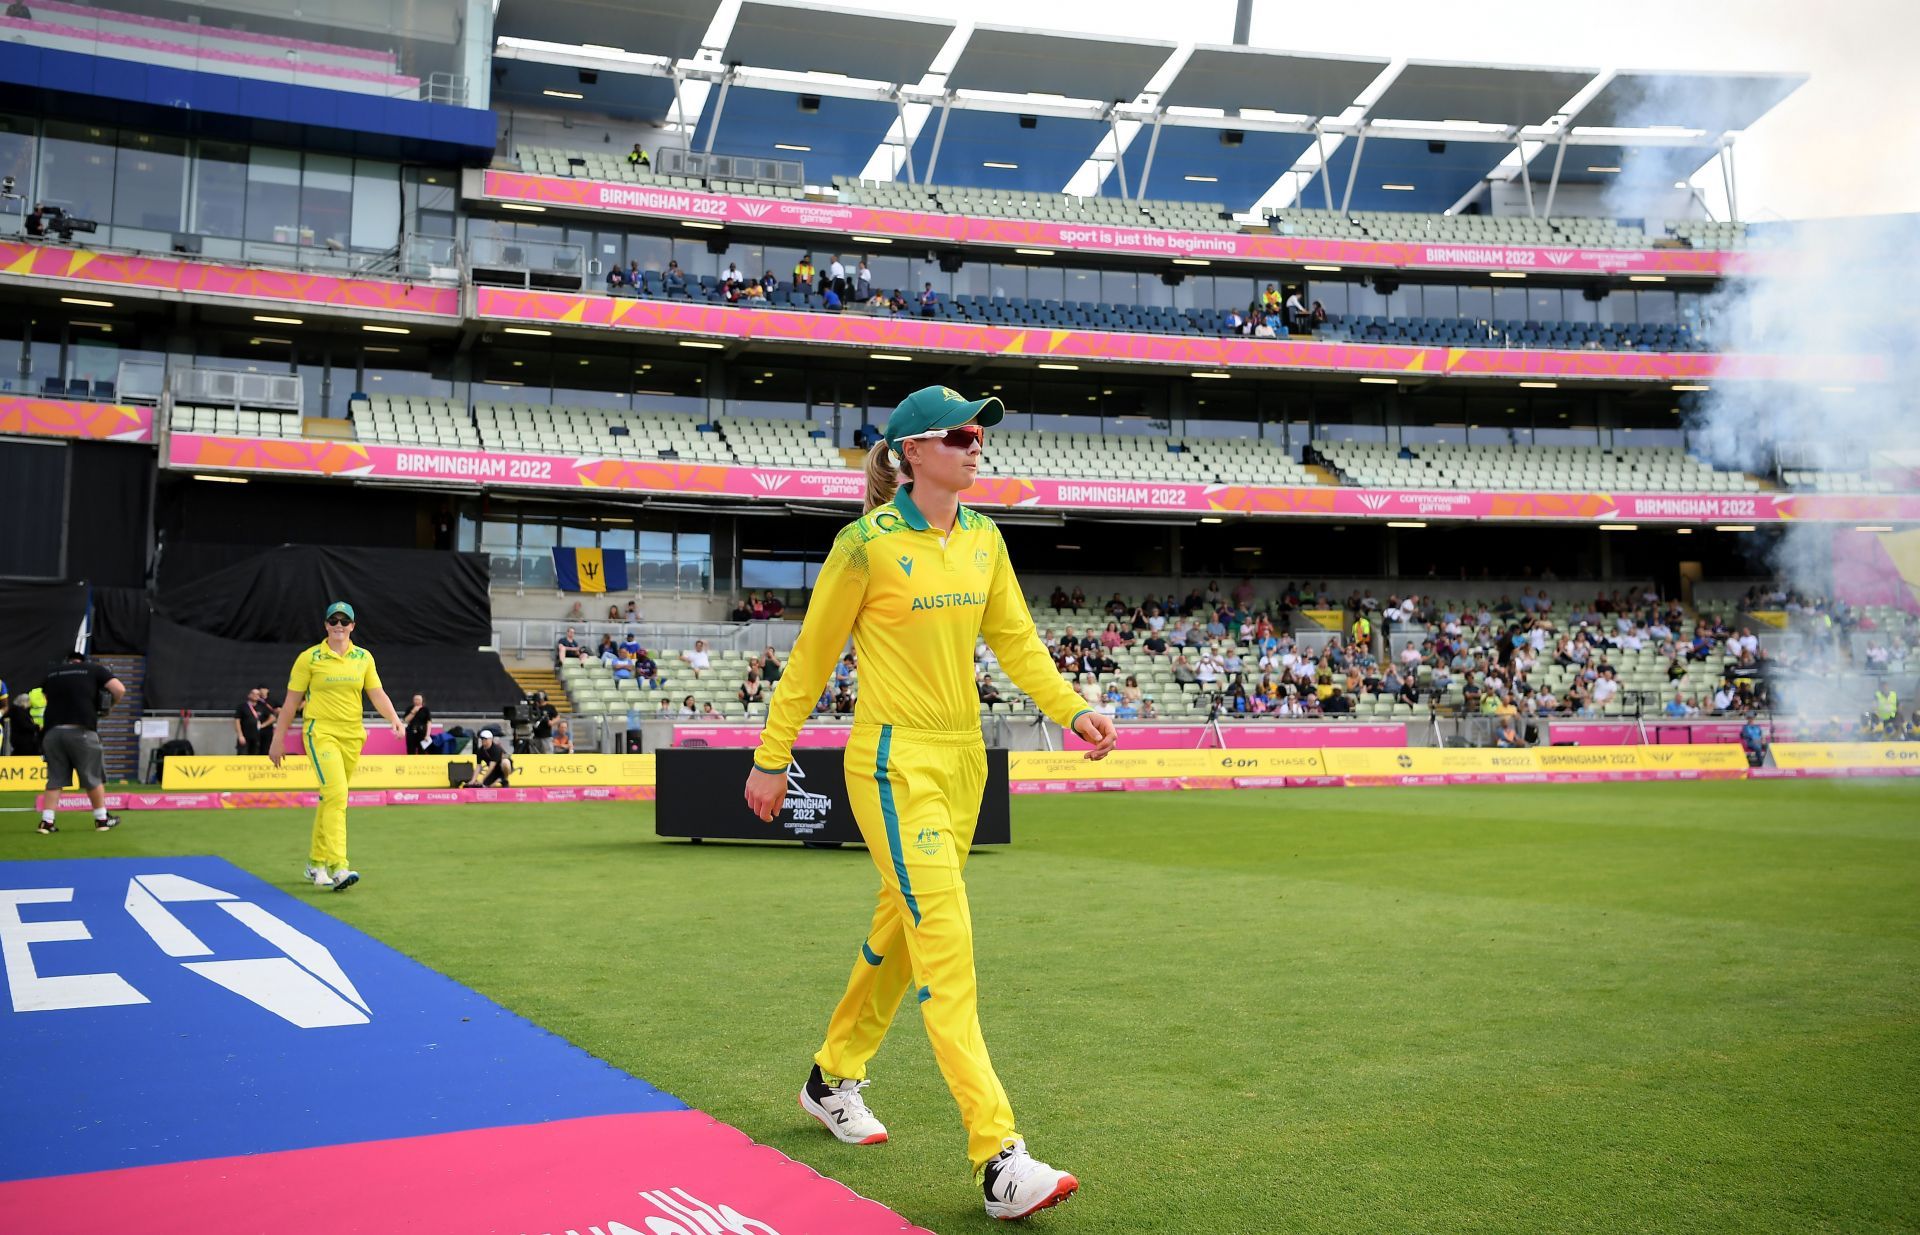 Cricket - Commonwealth Games: Day 3 (Image courtesy: Getty)